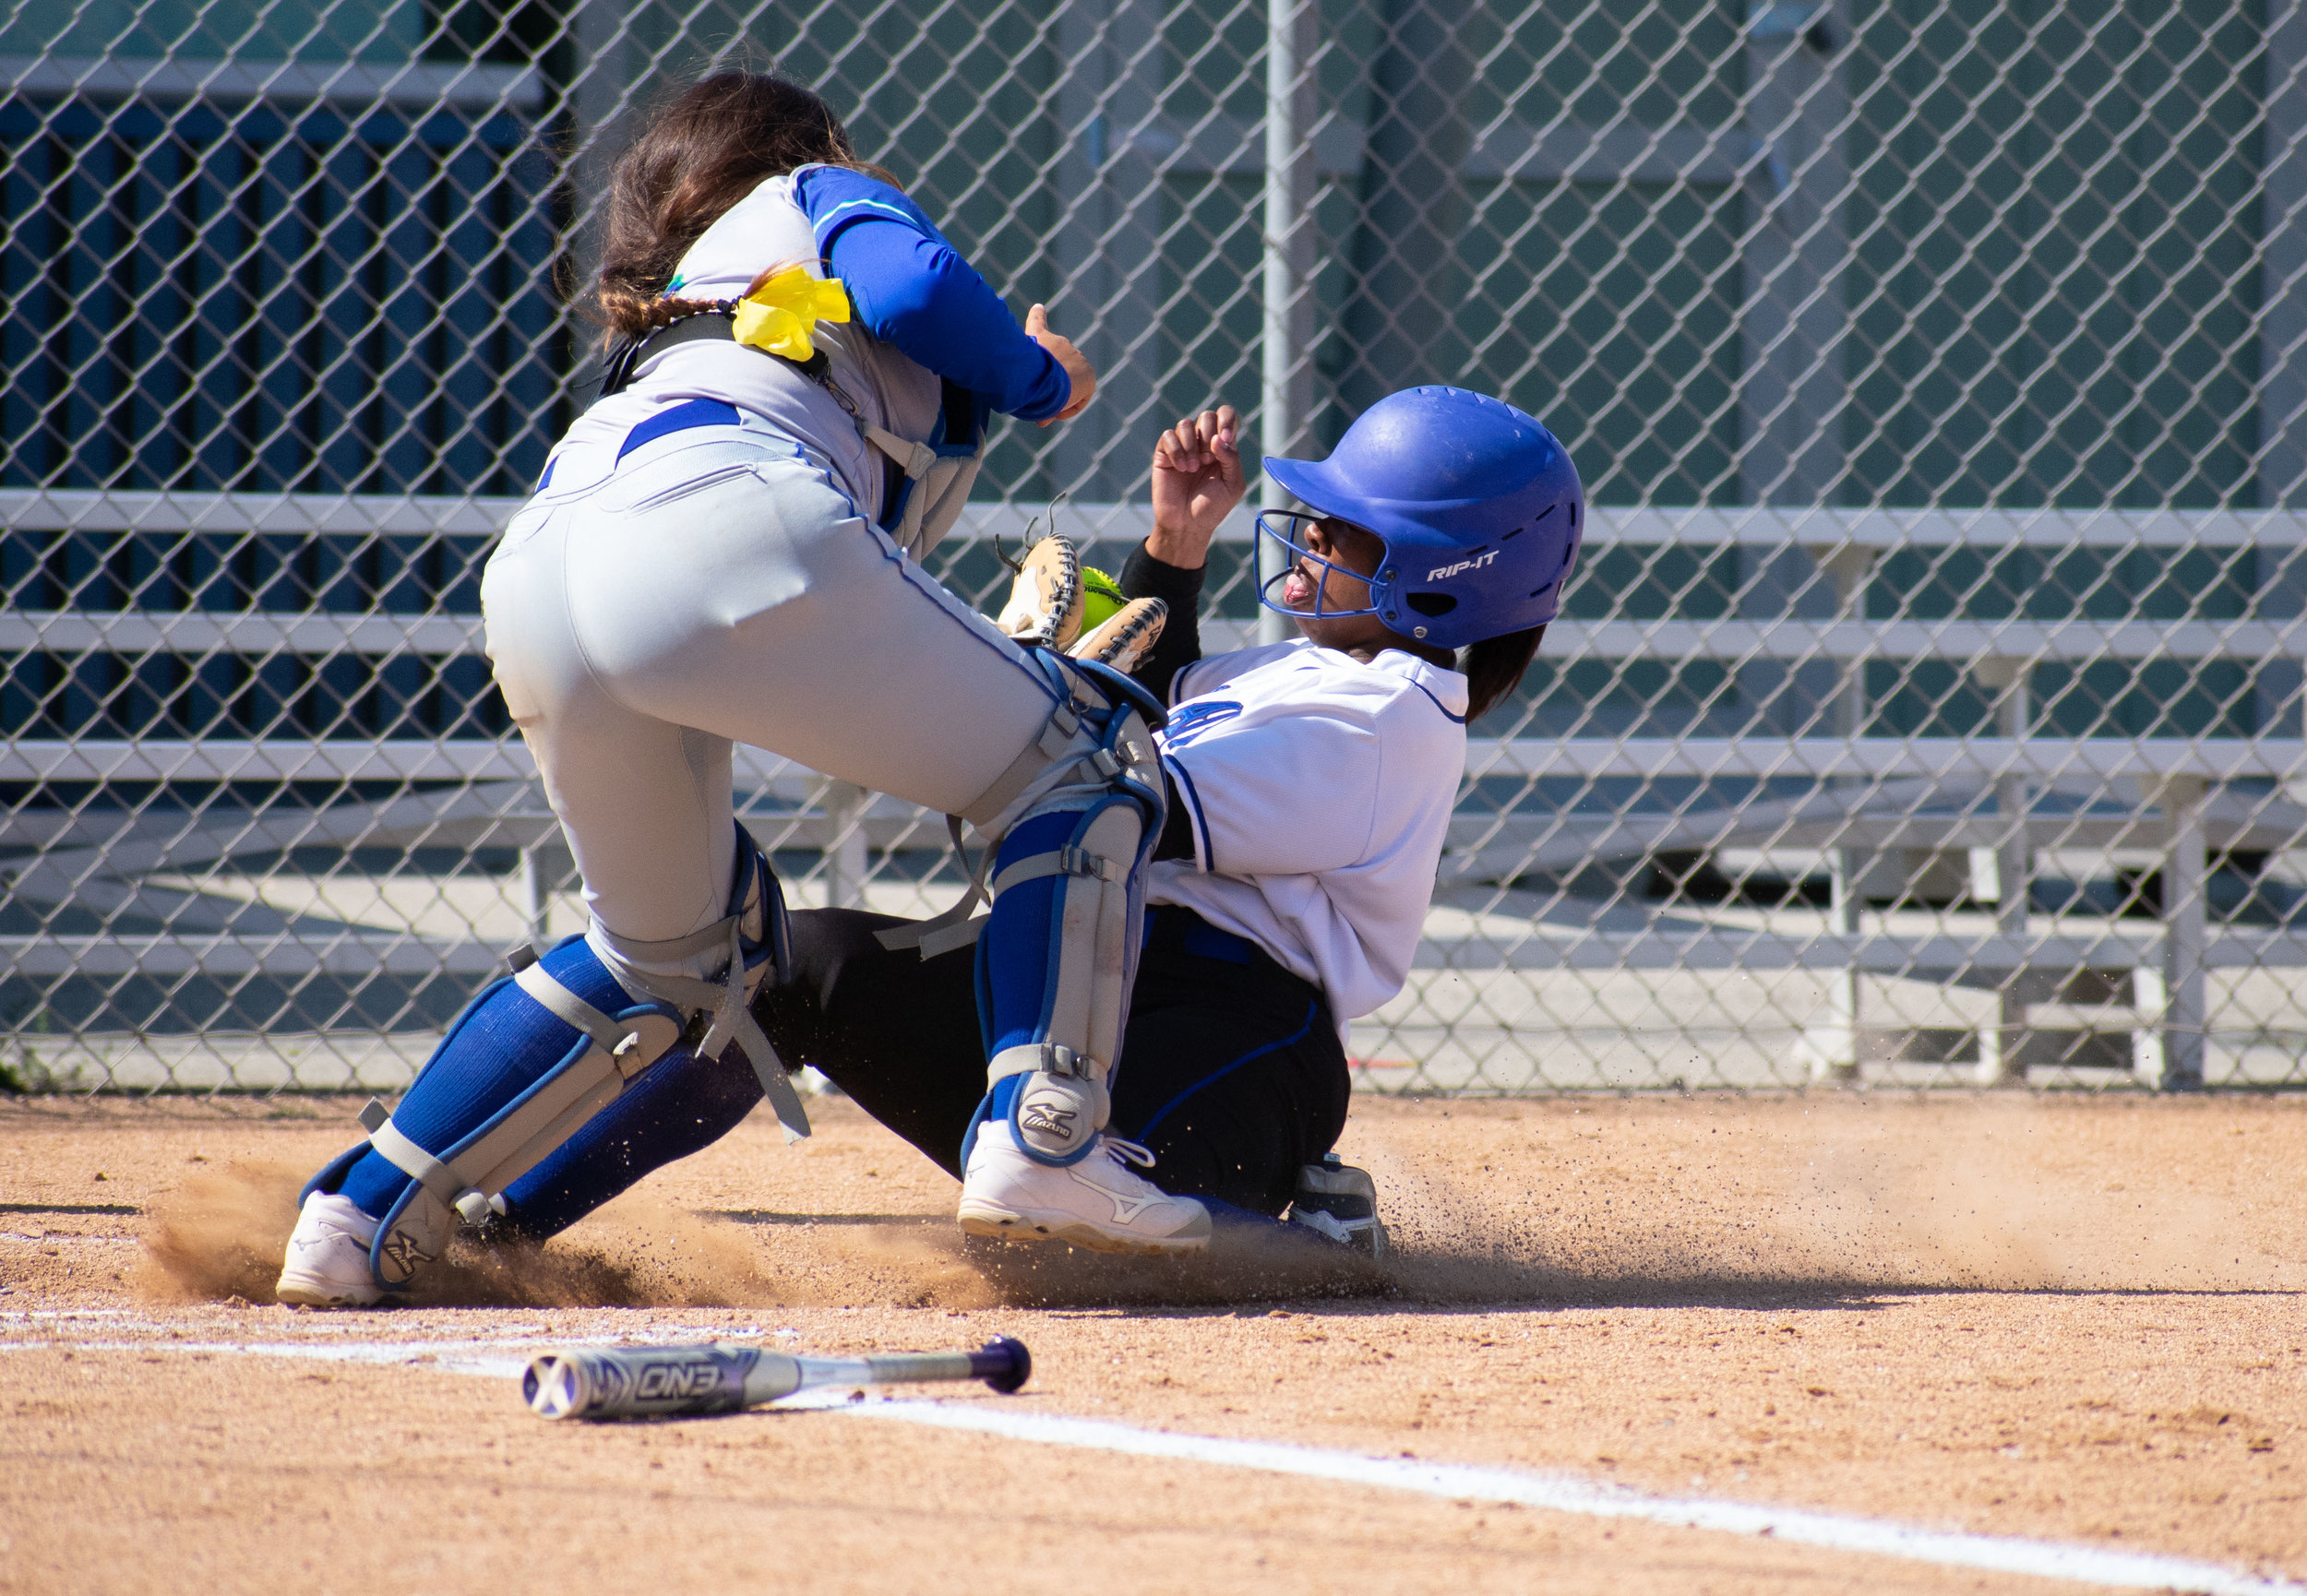  Santa Monica College Corsair Kahlaysia Miller (#8) fails to make it home in a softball game against the Oxnard Condors on Thursday, April 19, 2018 at the John Adams Middle School Field in Santa Monica, California. The game ended with an 3-2 win for 